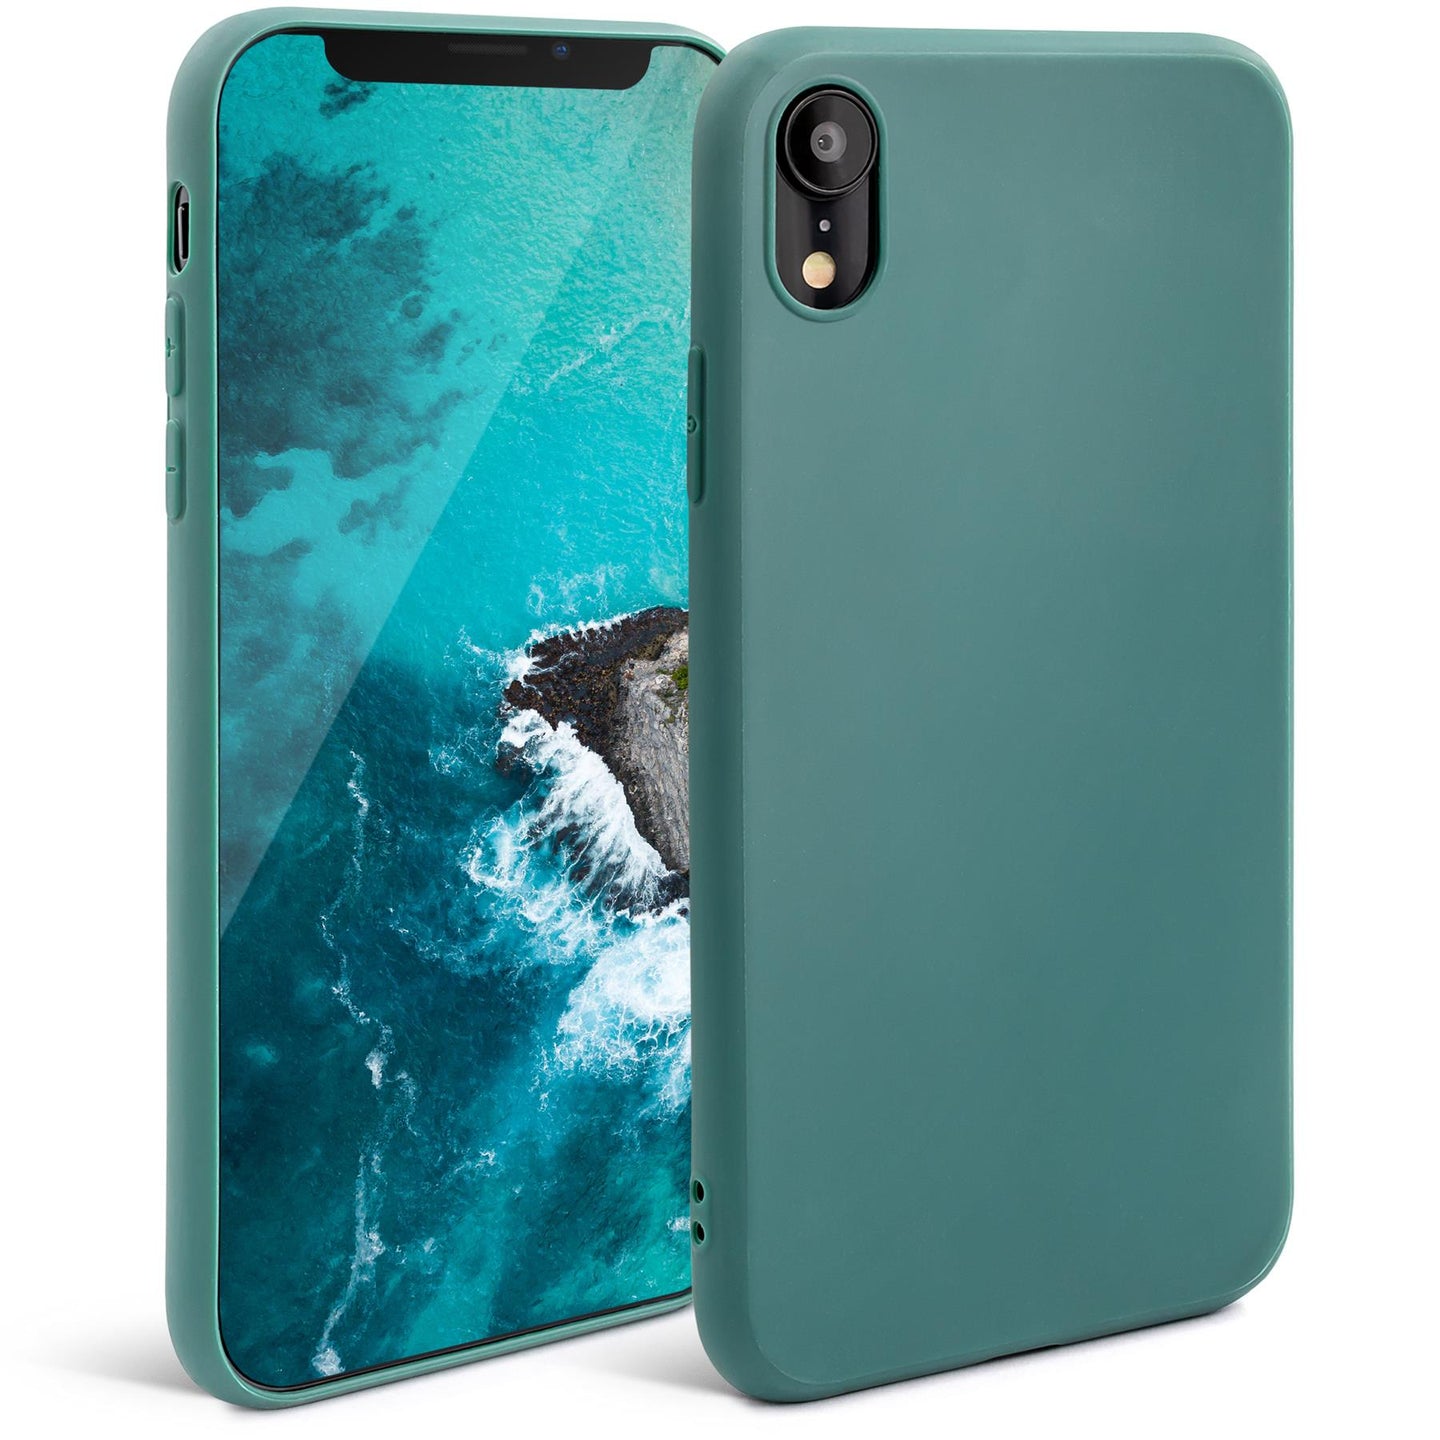 Moozy Minimalist Series Silicone Case for iPhone XR, Blue Grey - Matte Finish Slim Soft TPU Cover